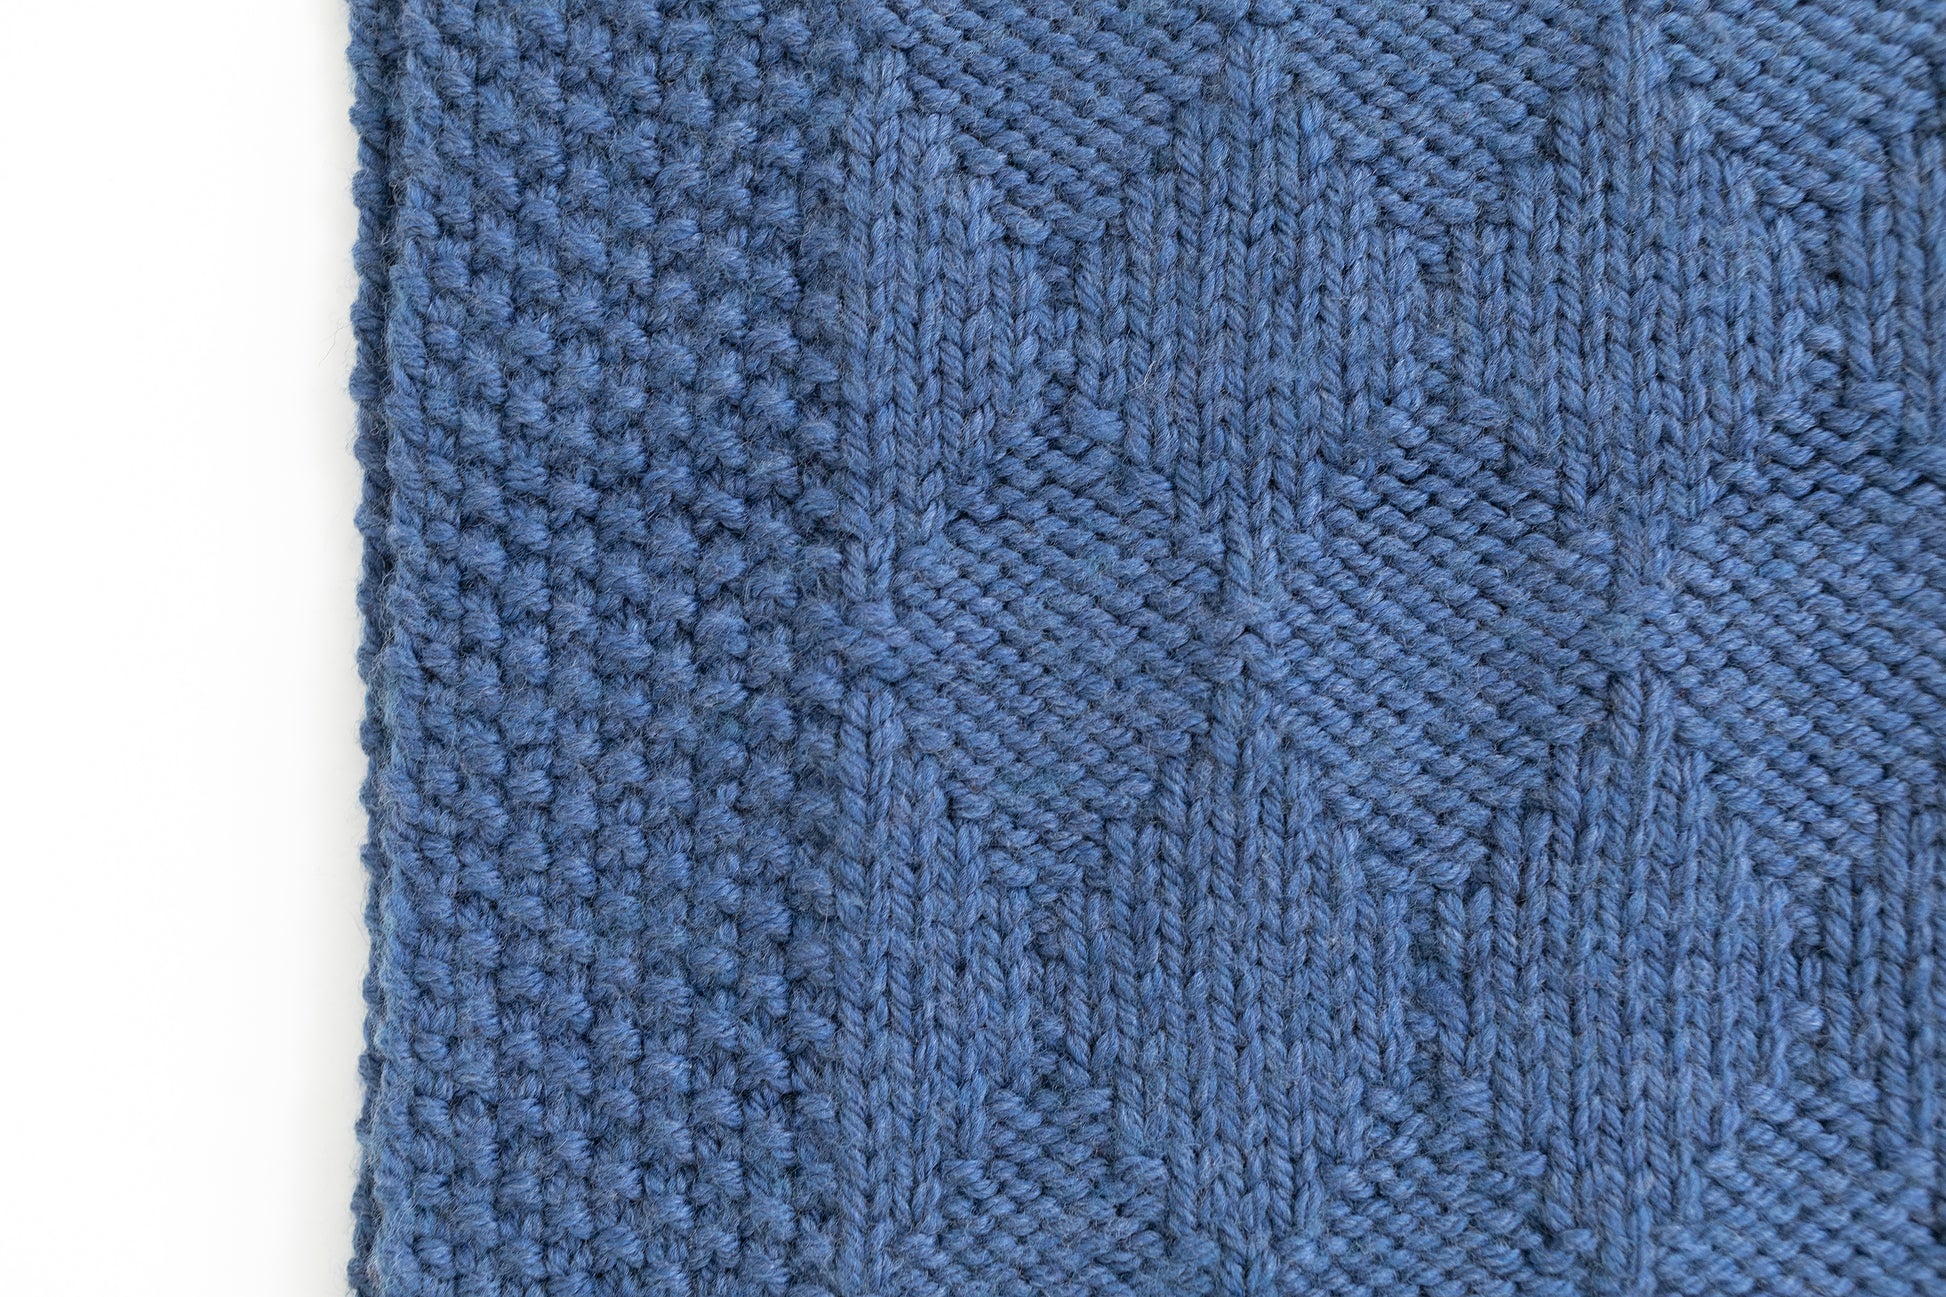 close up for Blue superwash wool hand-knitted baby blanket in Harlequin pattern